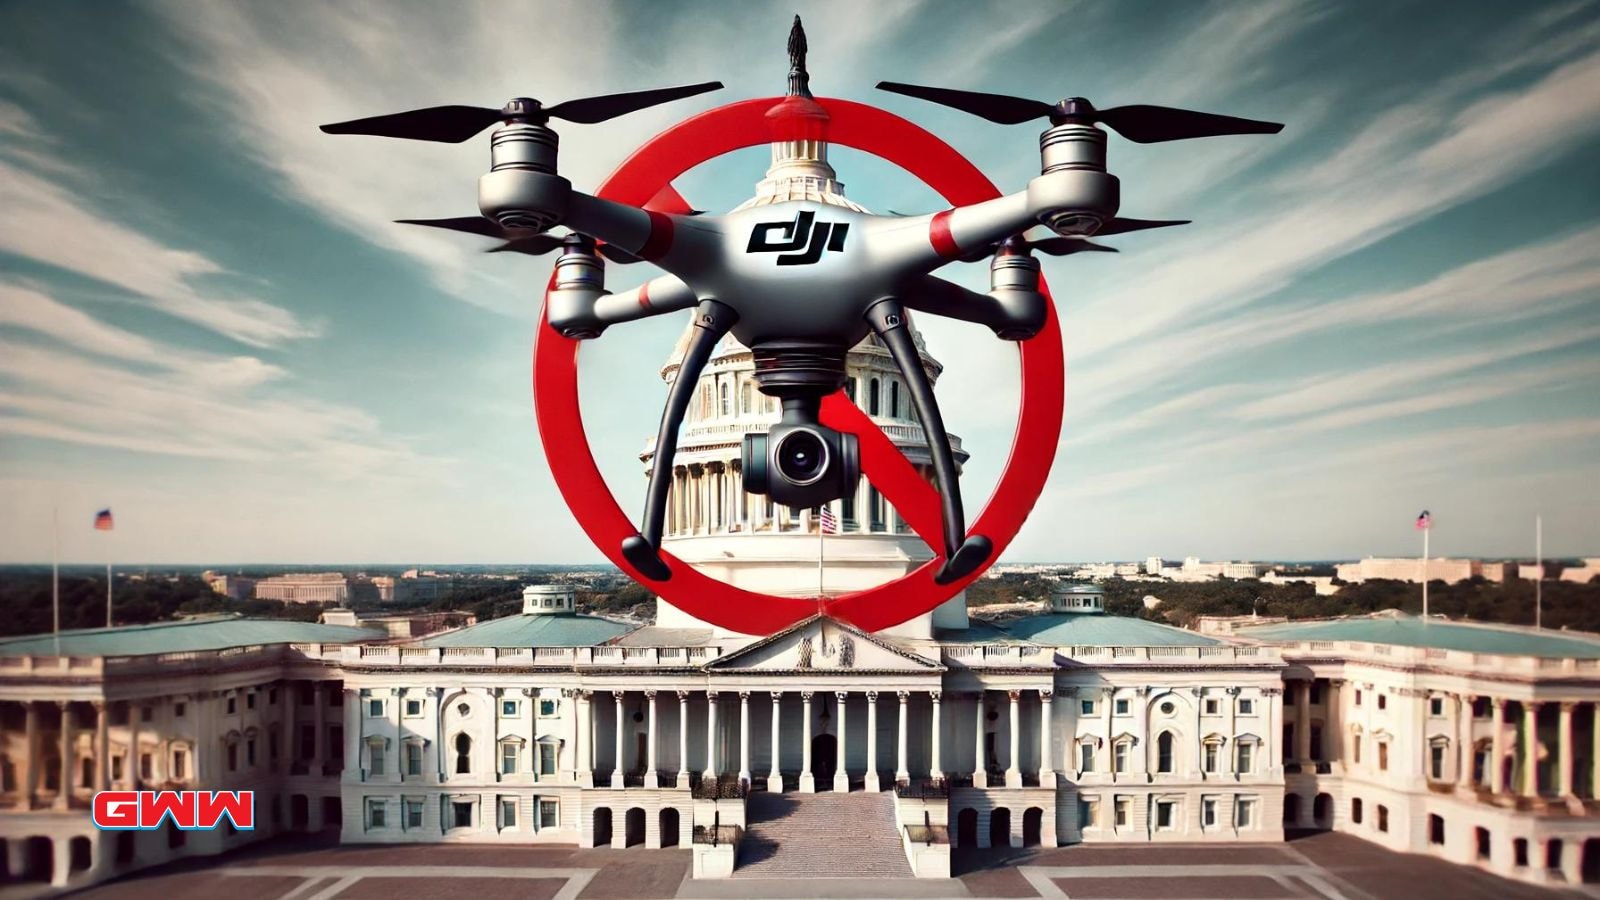 A wide image depicting a DJI drone with a red ban sign over it, set against a backdrop of the U.S. Capitol building